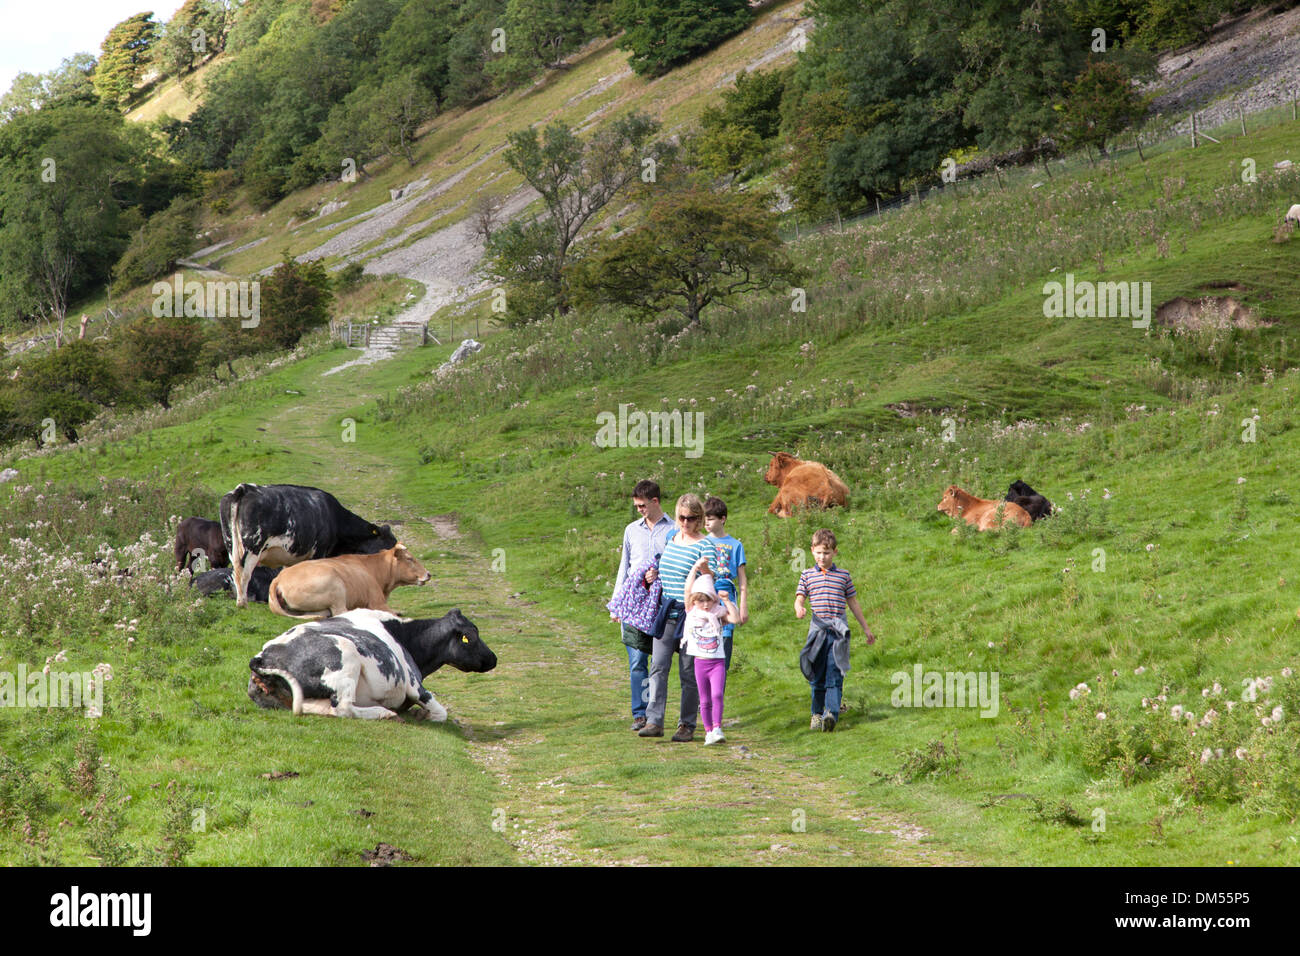 A family walking through a field of cows, Yorkshire Dales, Yorkshire, England, UK Stock Photo